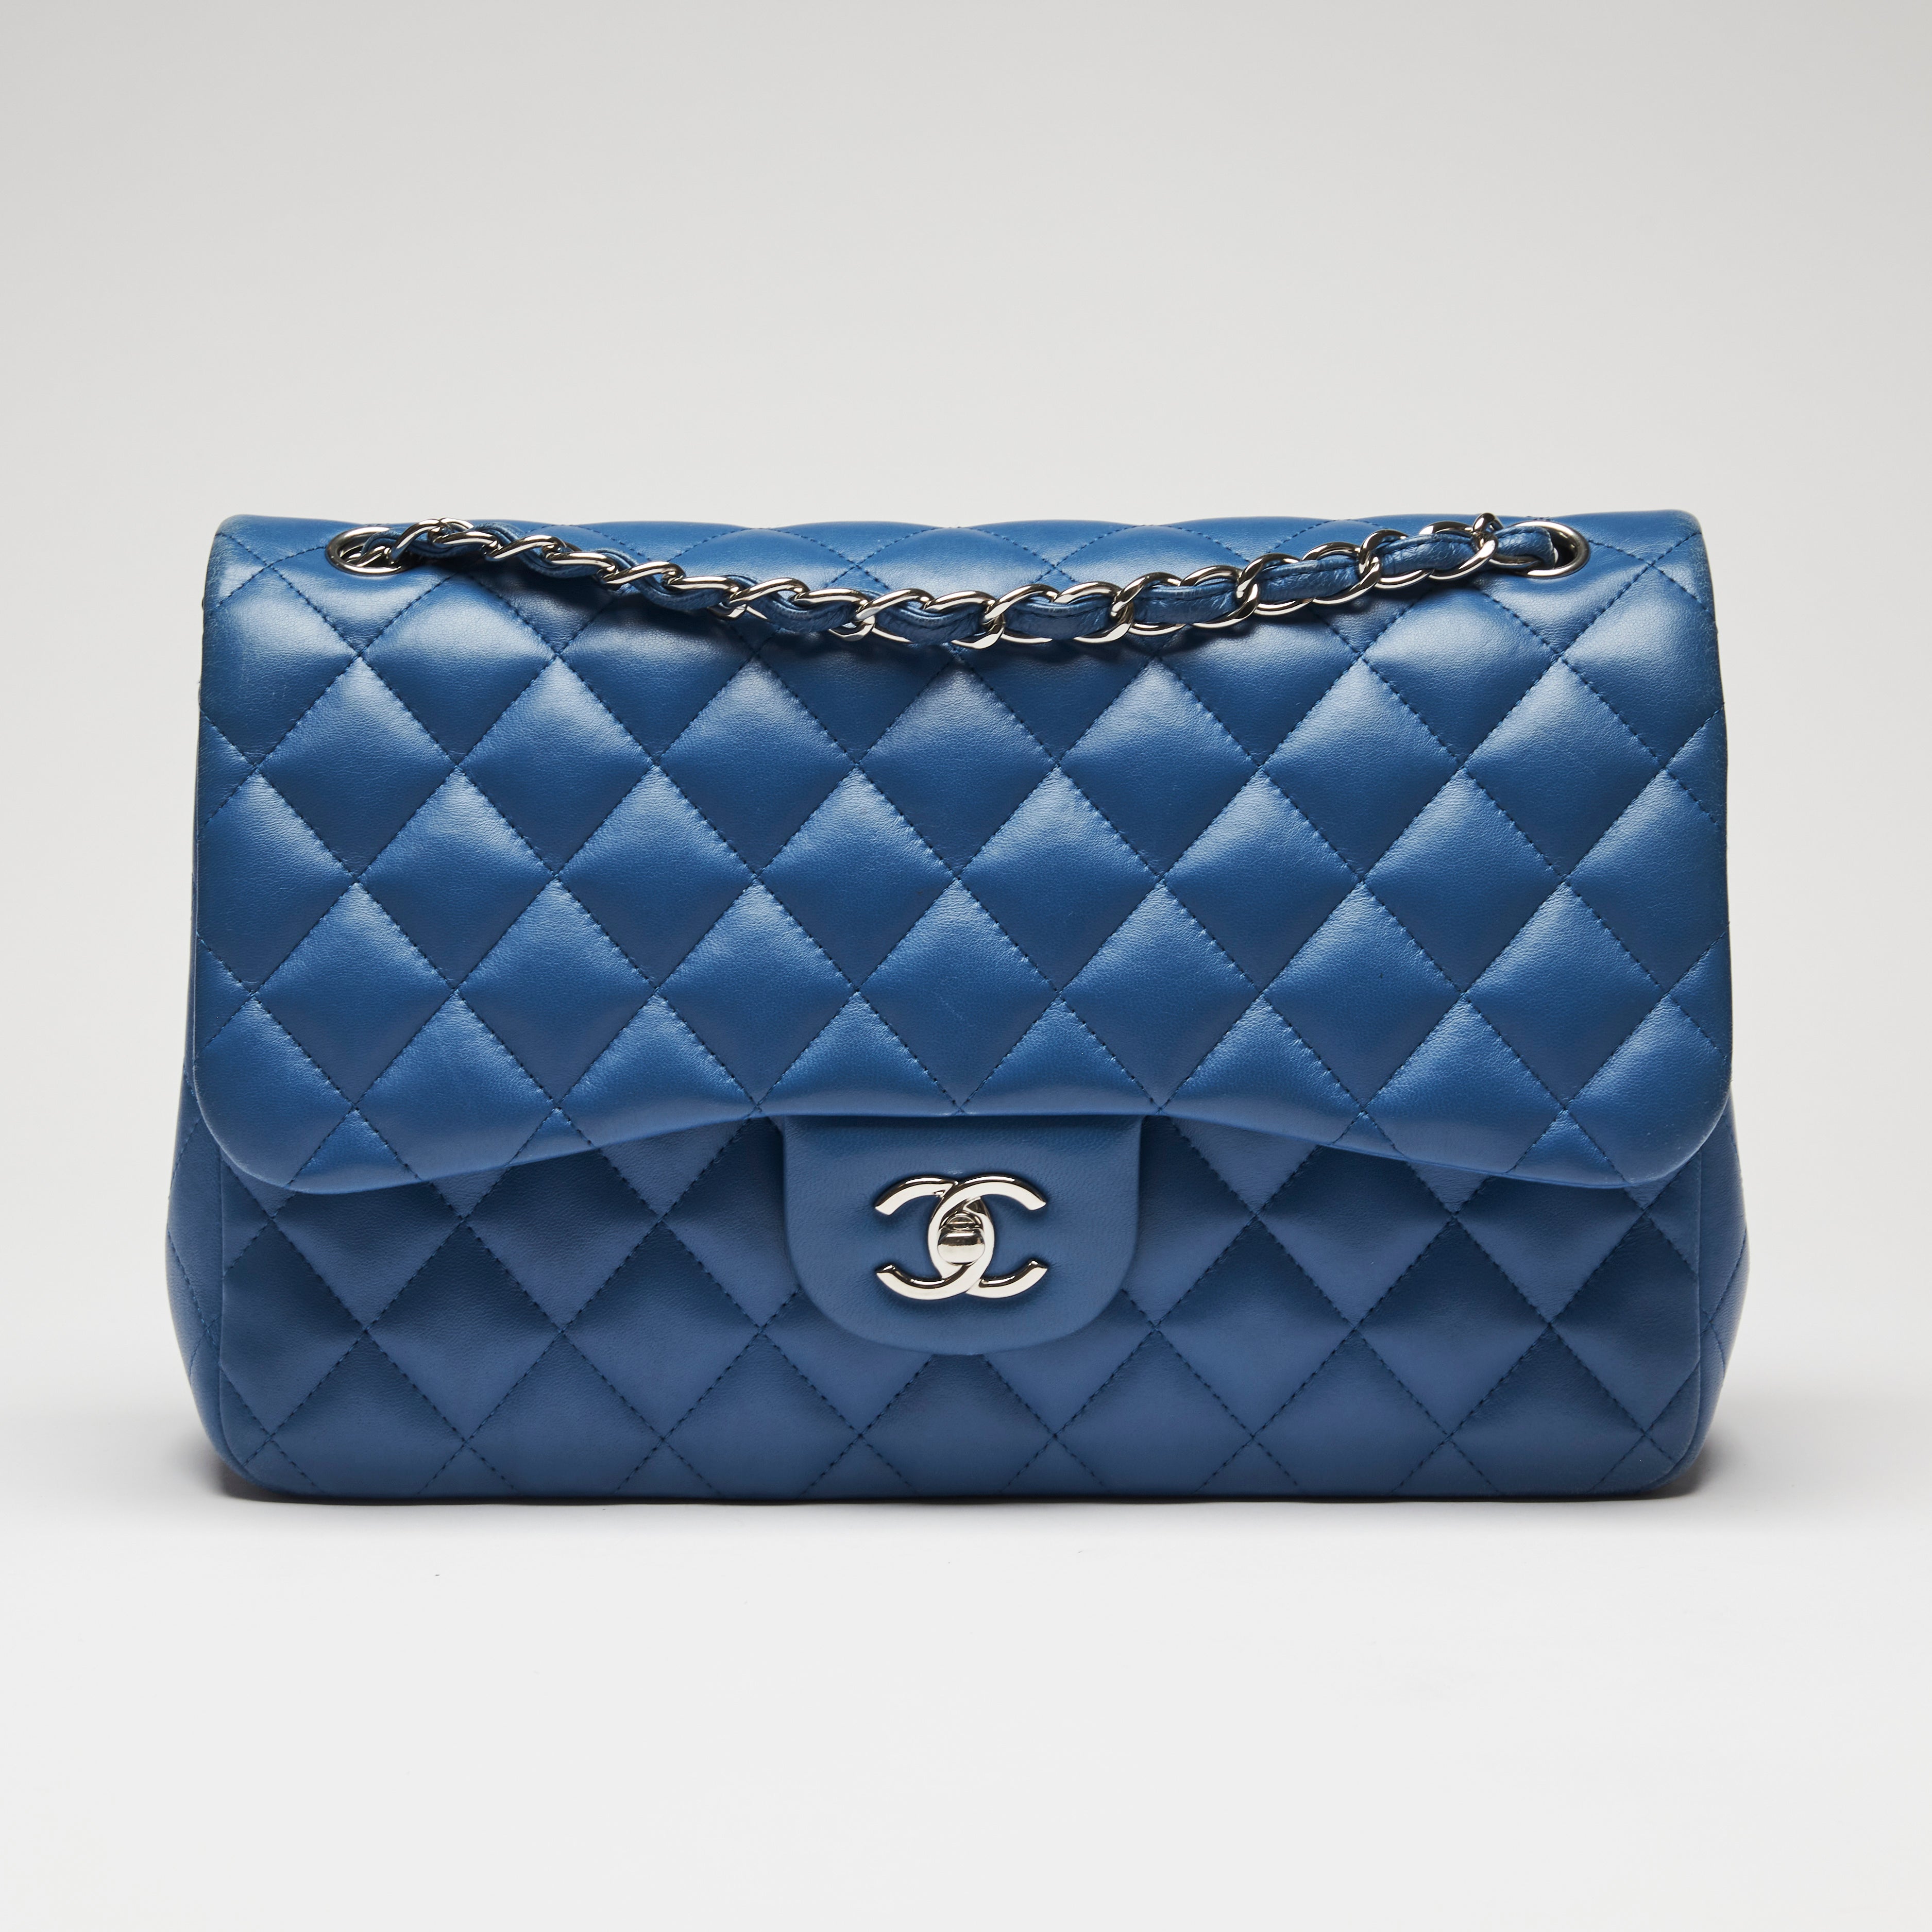 Chanel Bright Blue Lambskin Large Double Flap Bag